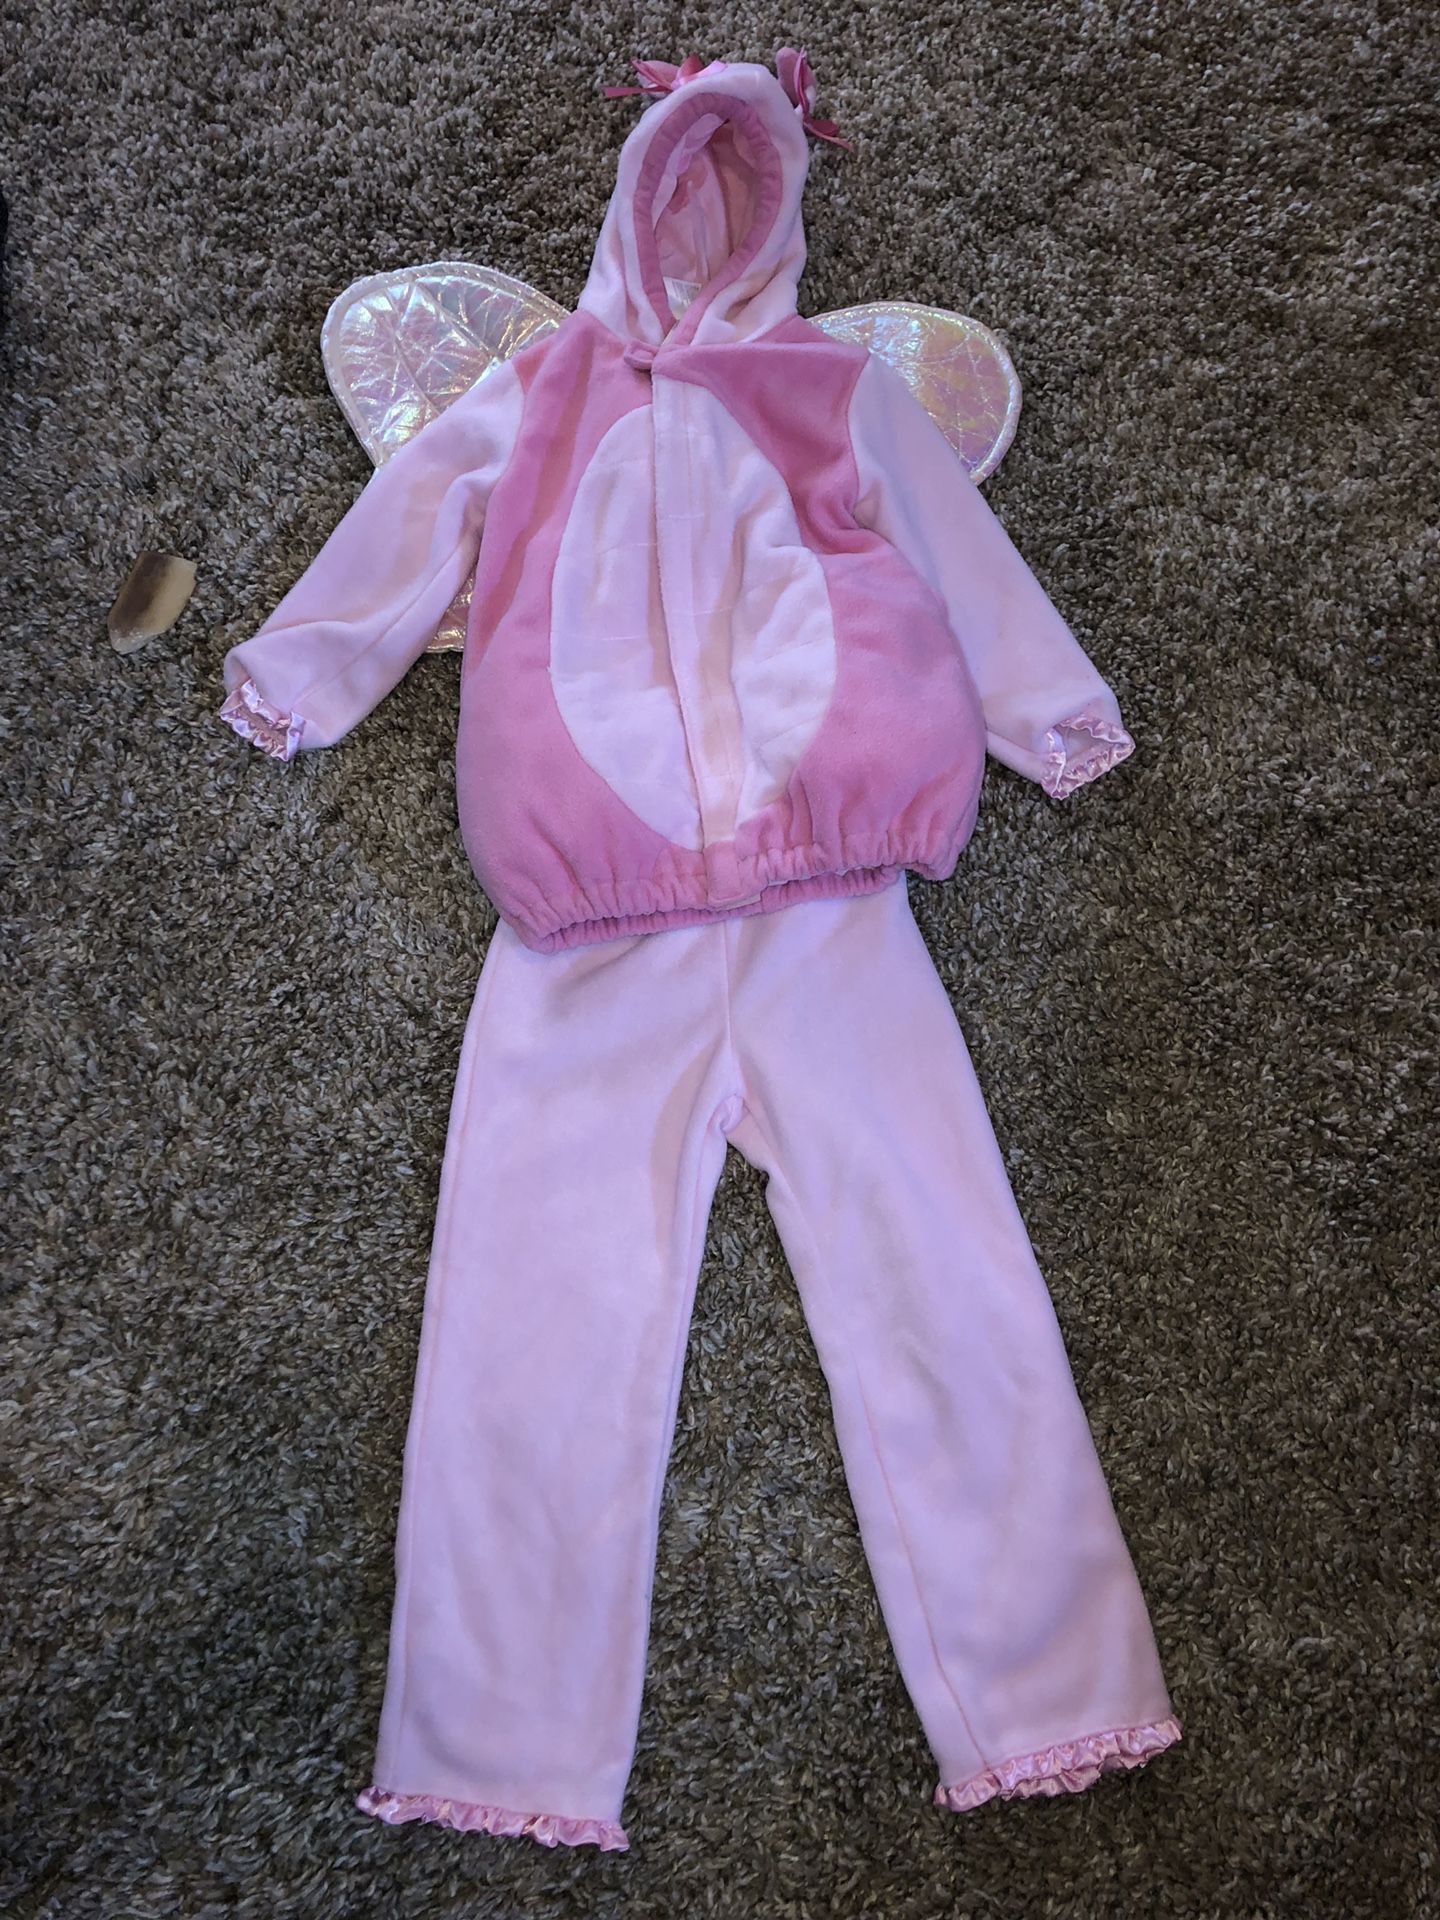 Old navy 4T/5T butterfly costume, dressup, new with tags